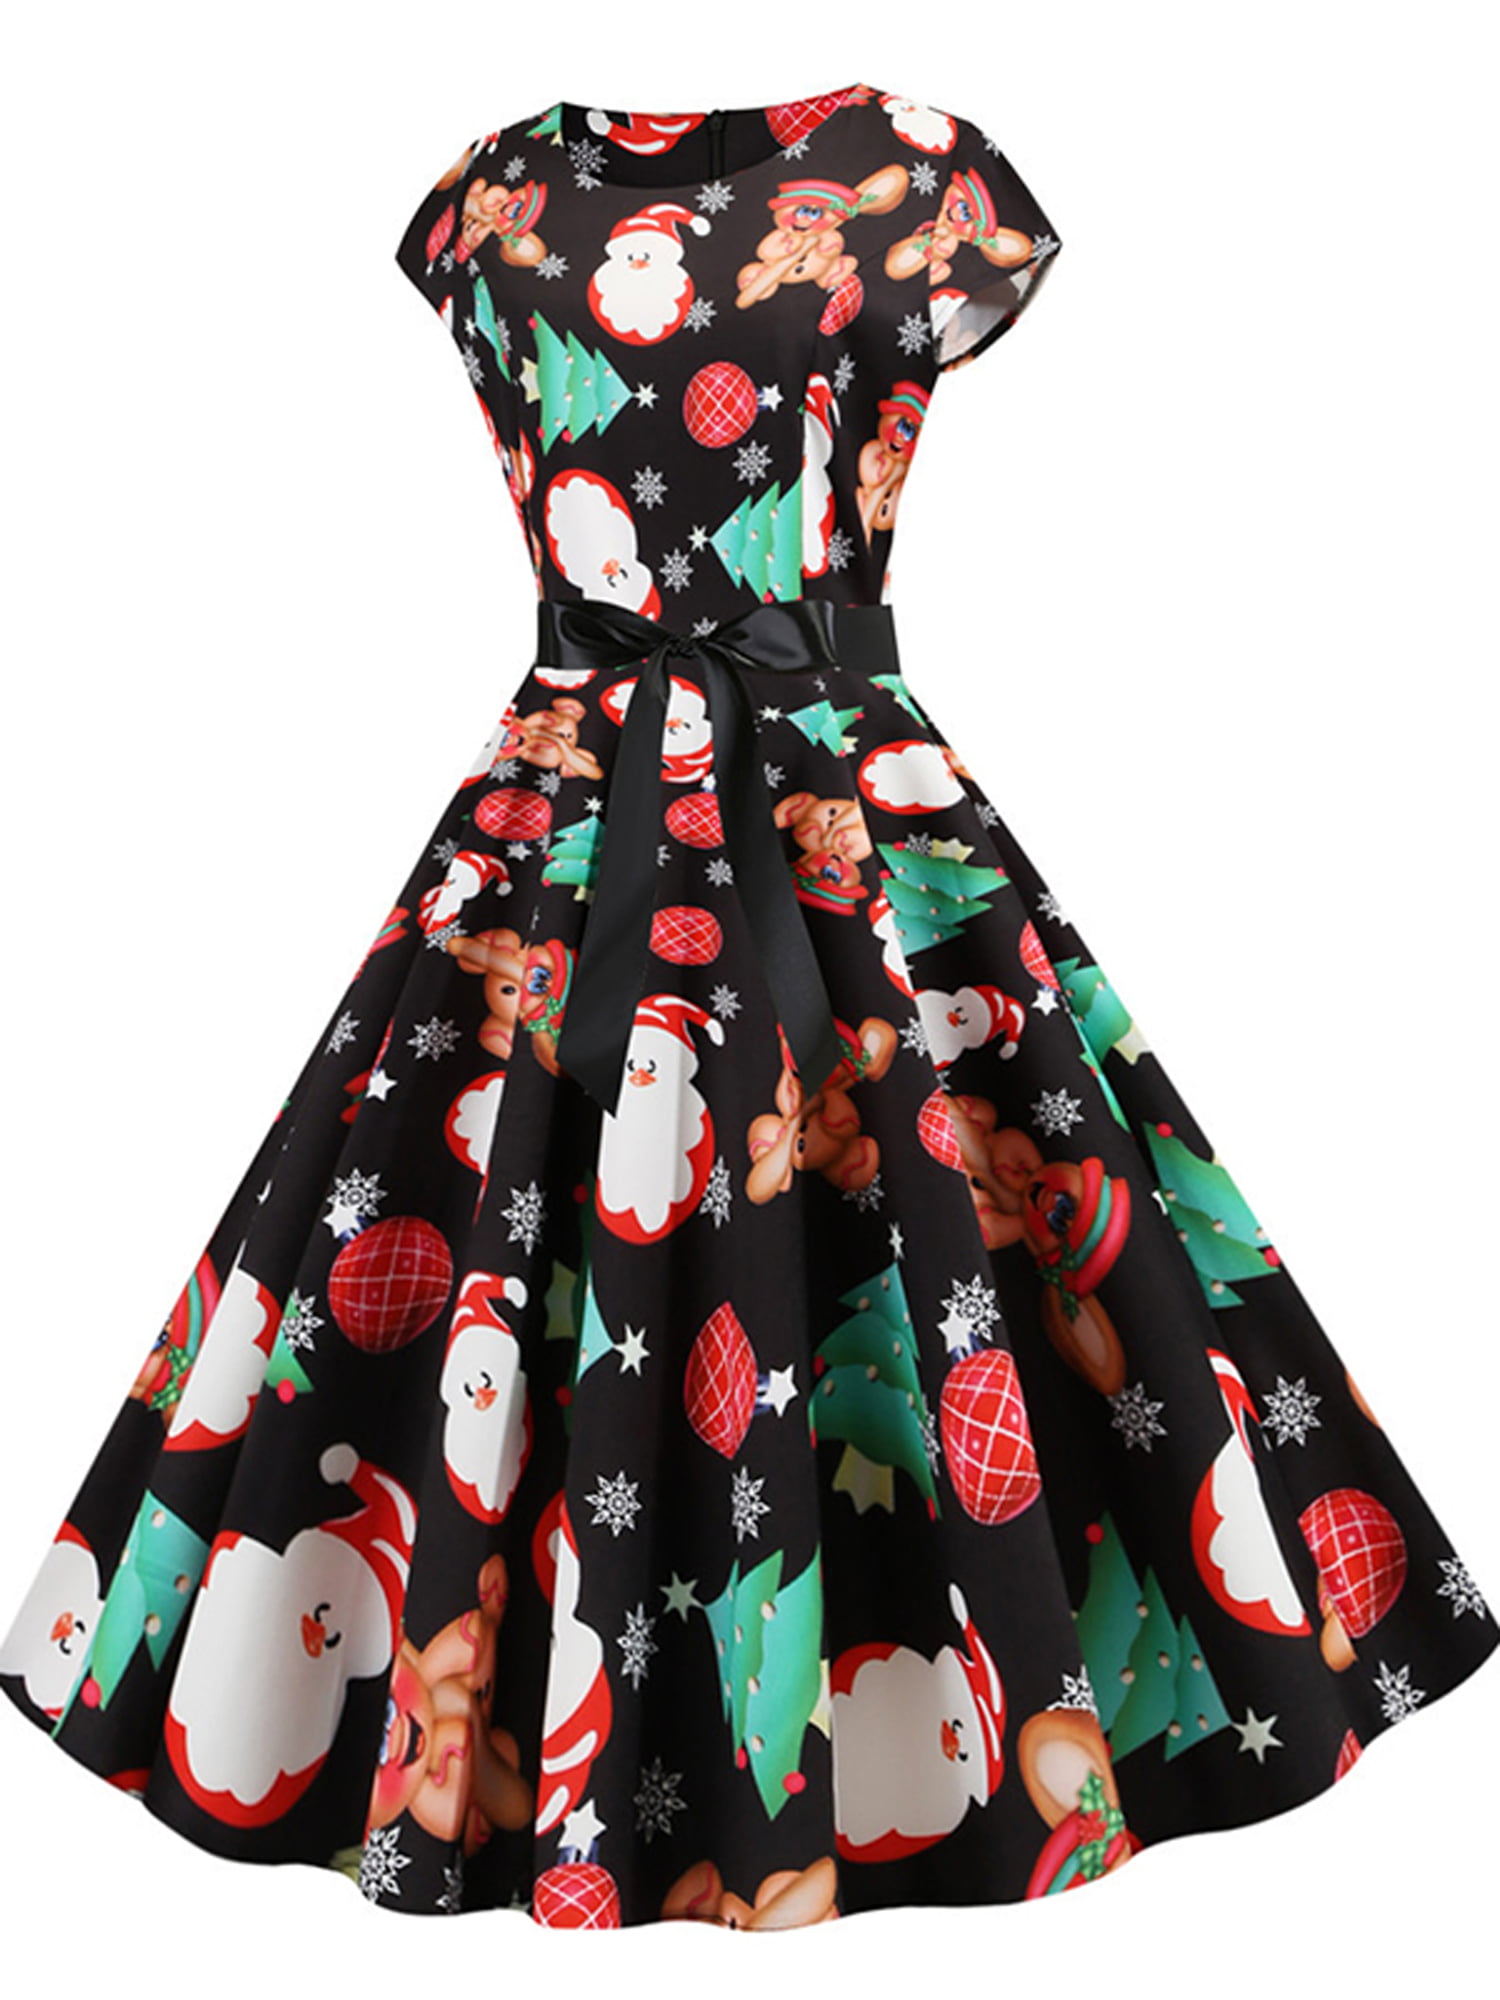 Fudule 2020 Women Dresses,Womens Vintage Short Sleeve Christmas Printed Party Dress Bow Knot A-Line Swing Dress Suit 